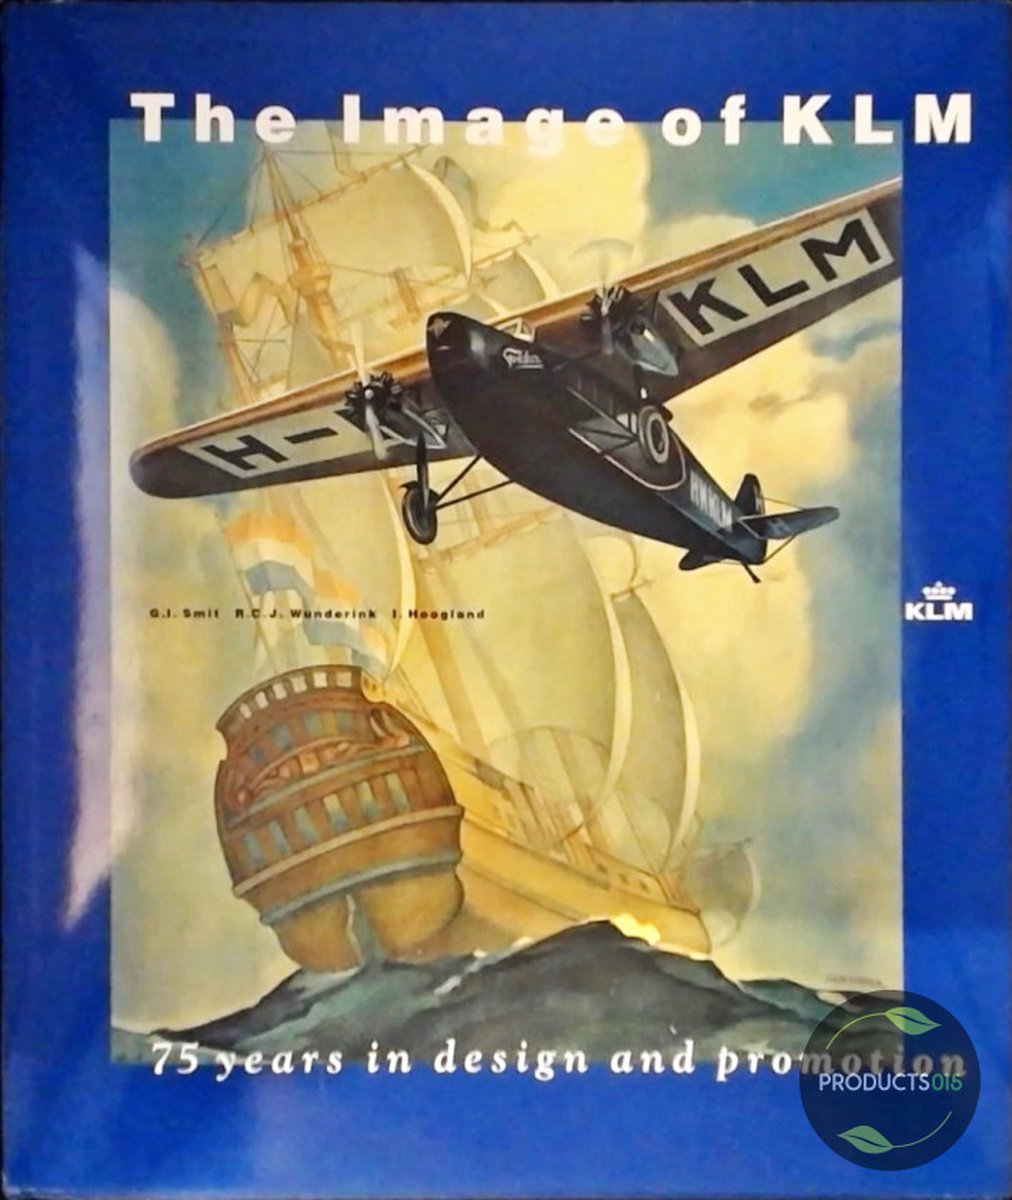 The image of KLM